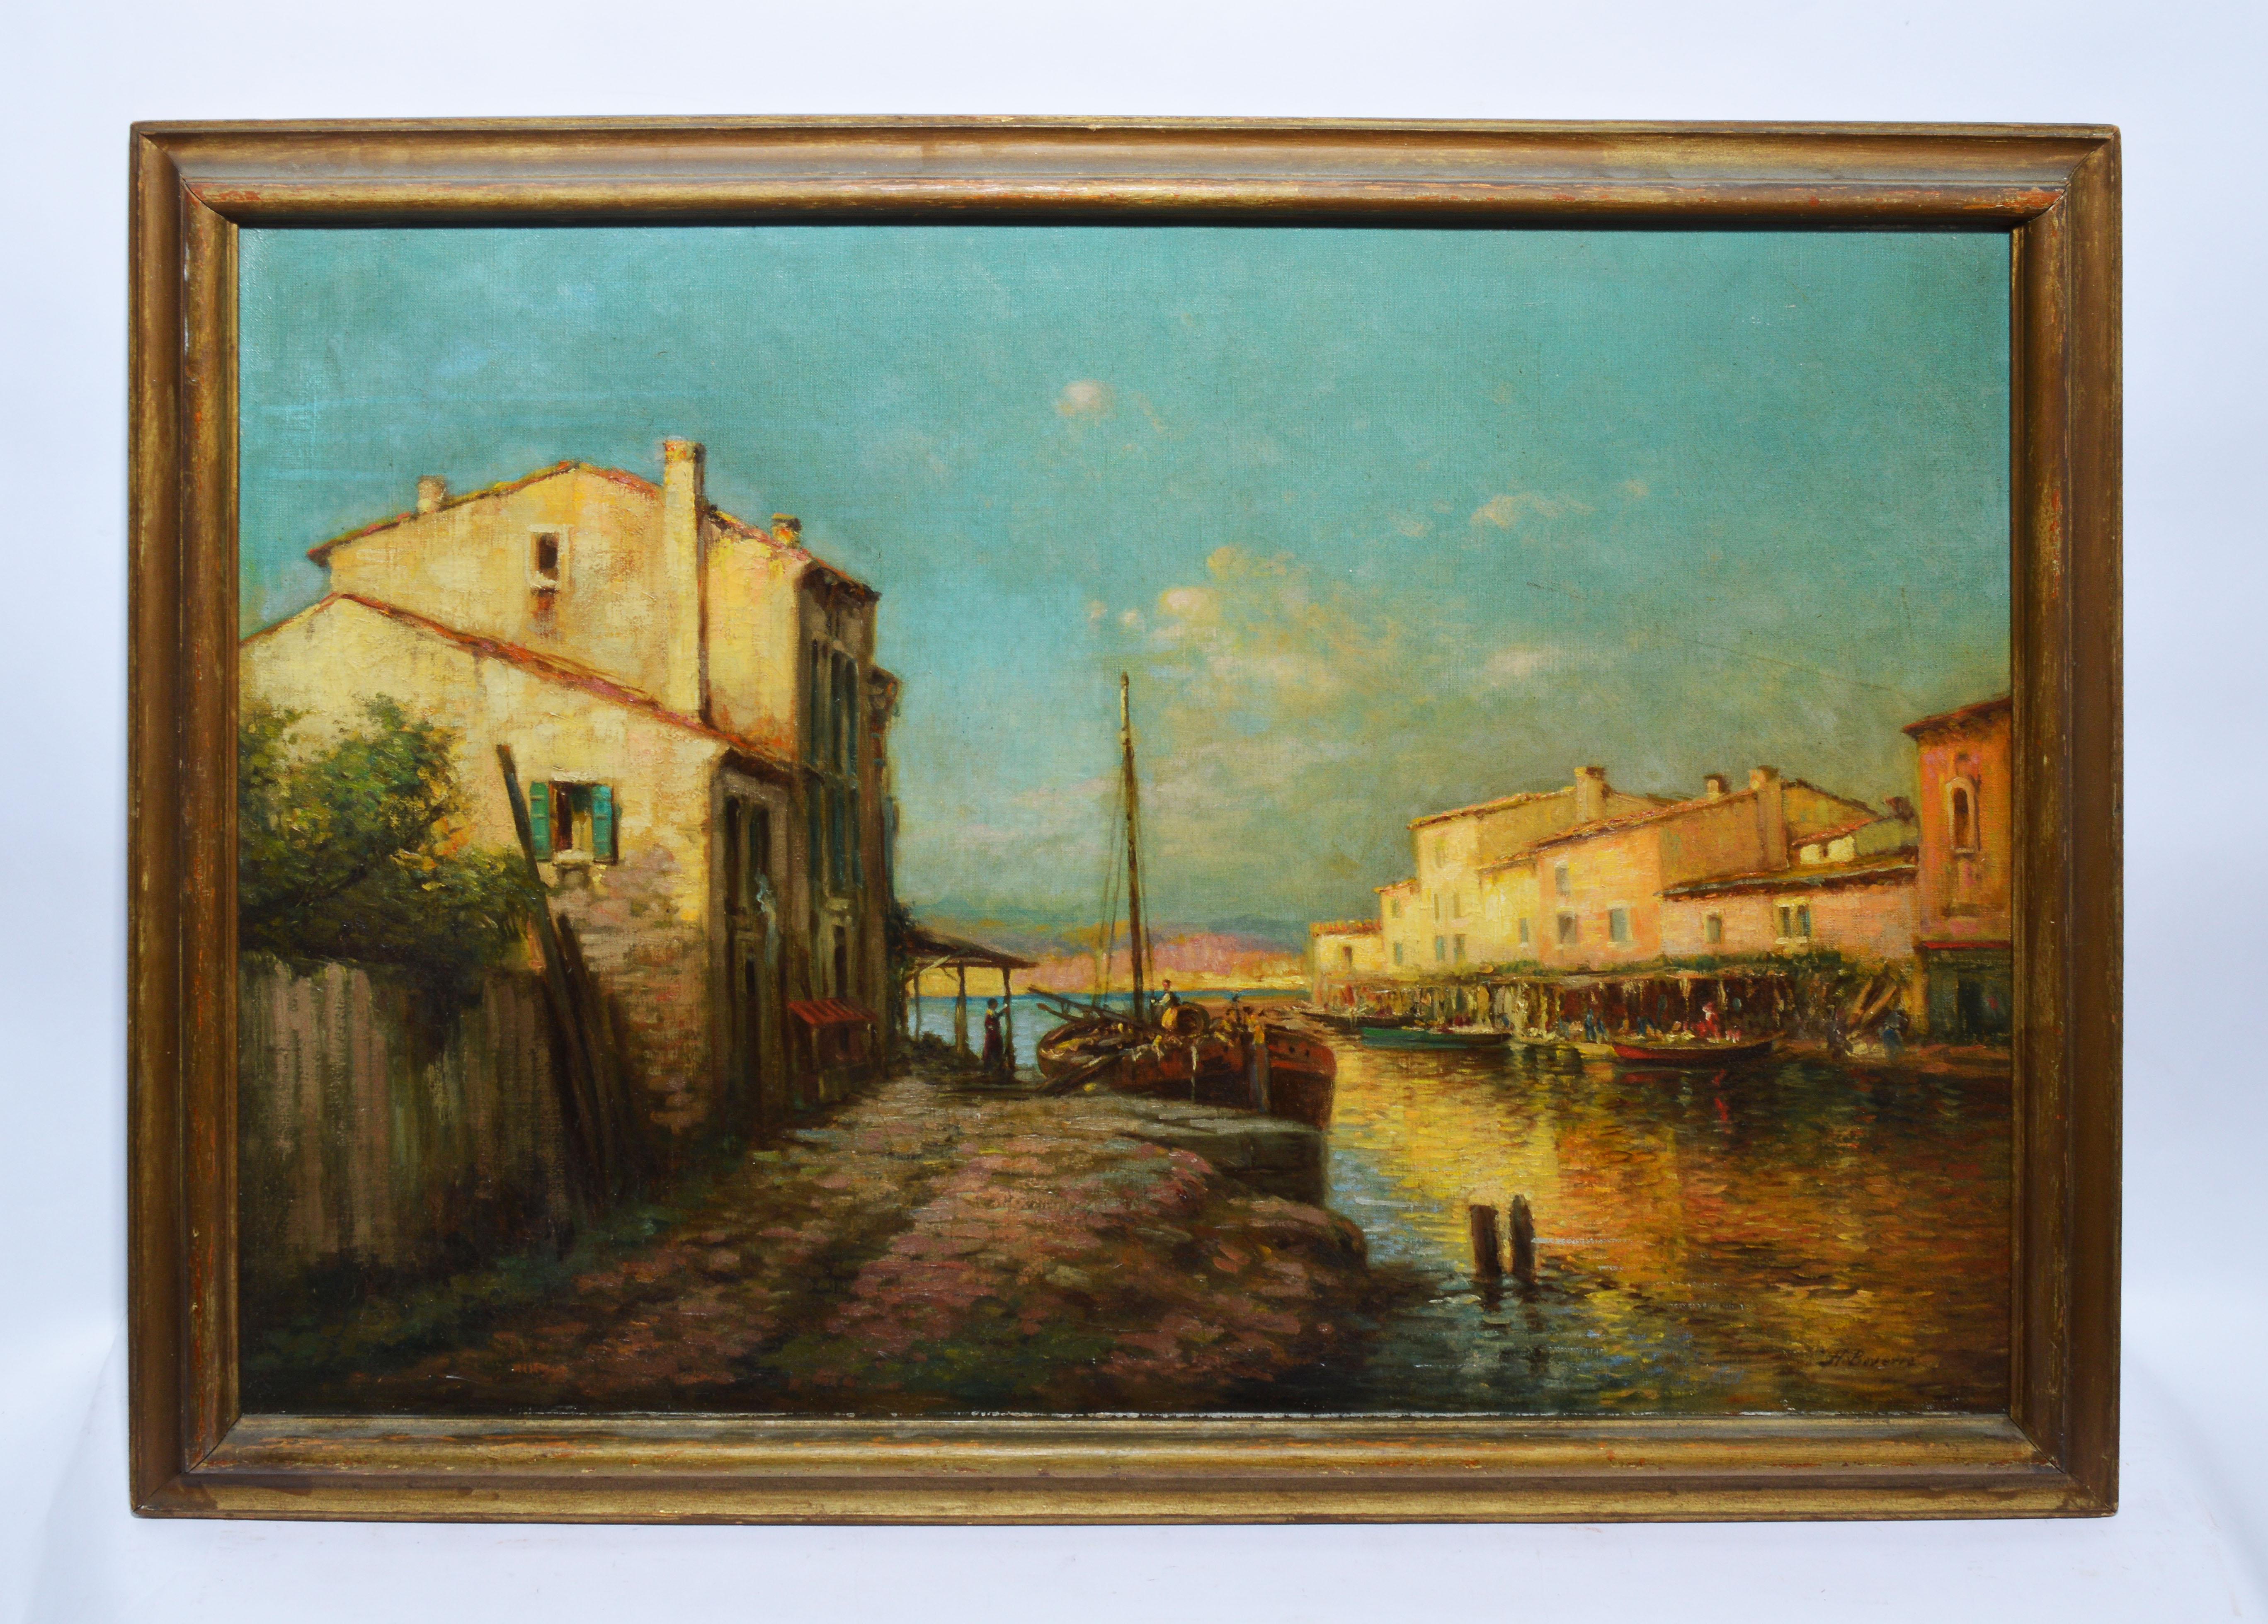 Antique Italian Sunset View of Venice, Large 19th Century Signed Oil Painting - Brown Landscape Painting by Unknown